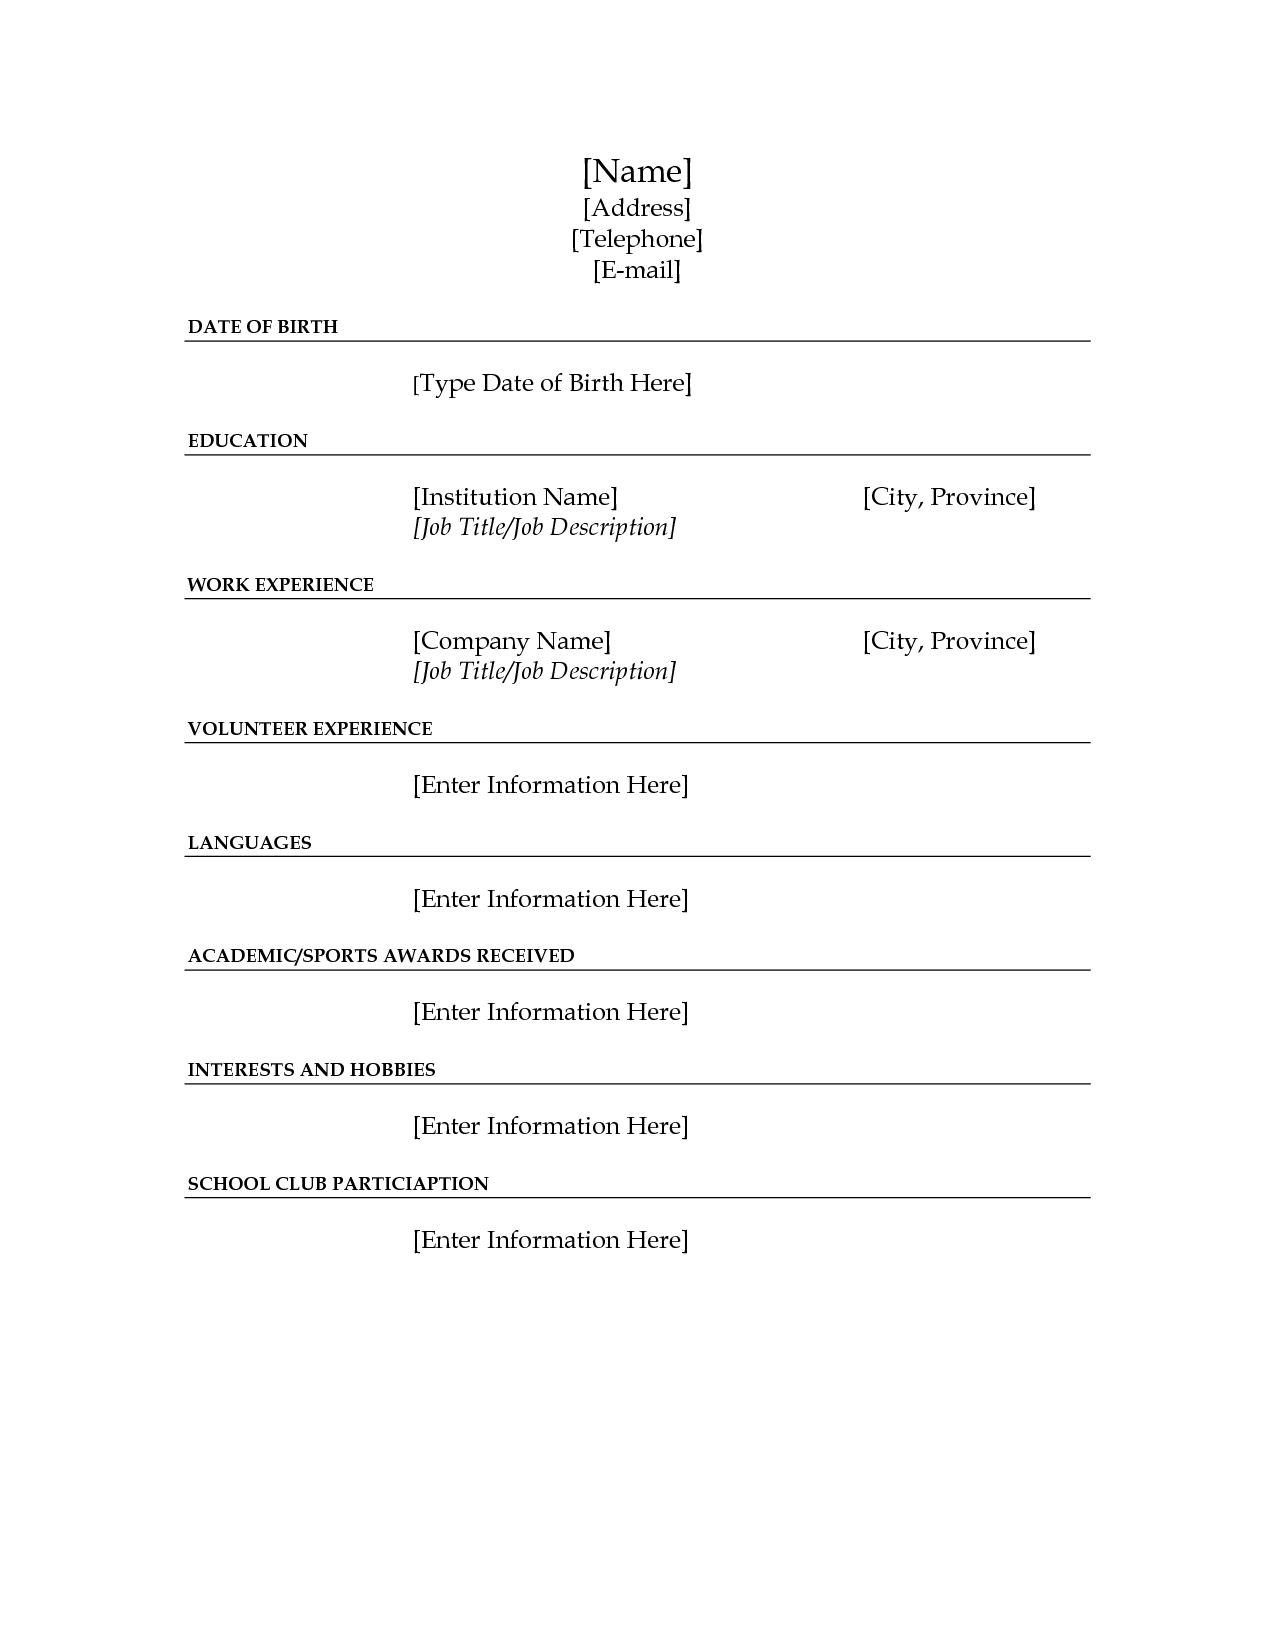 Free Printable Fill In The Blank Resume Templates